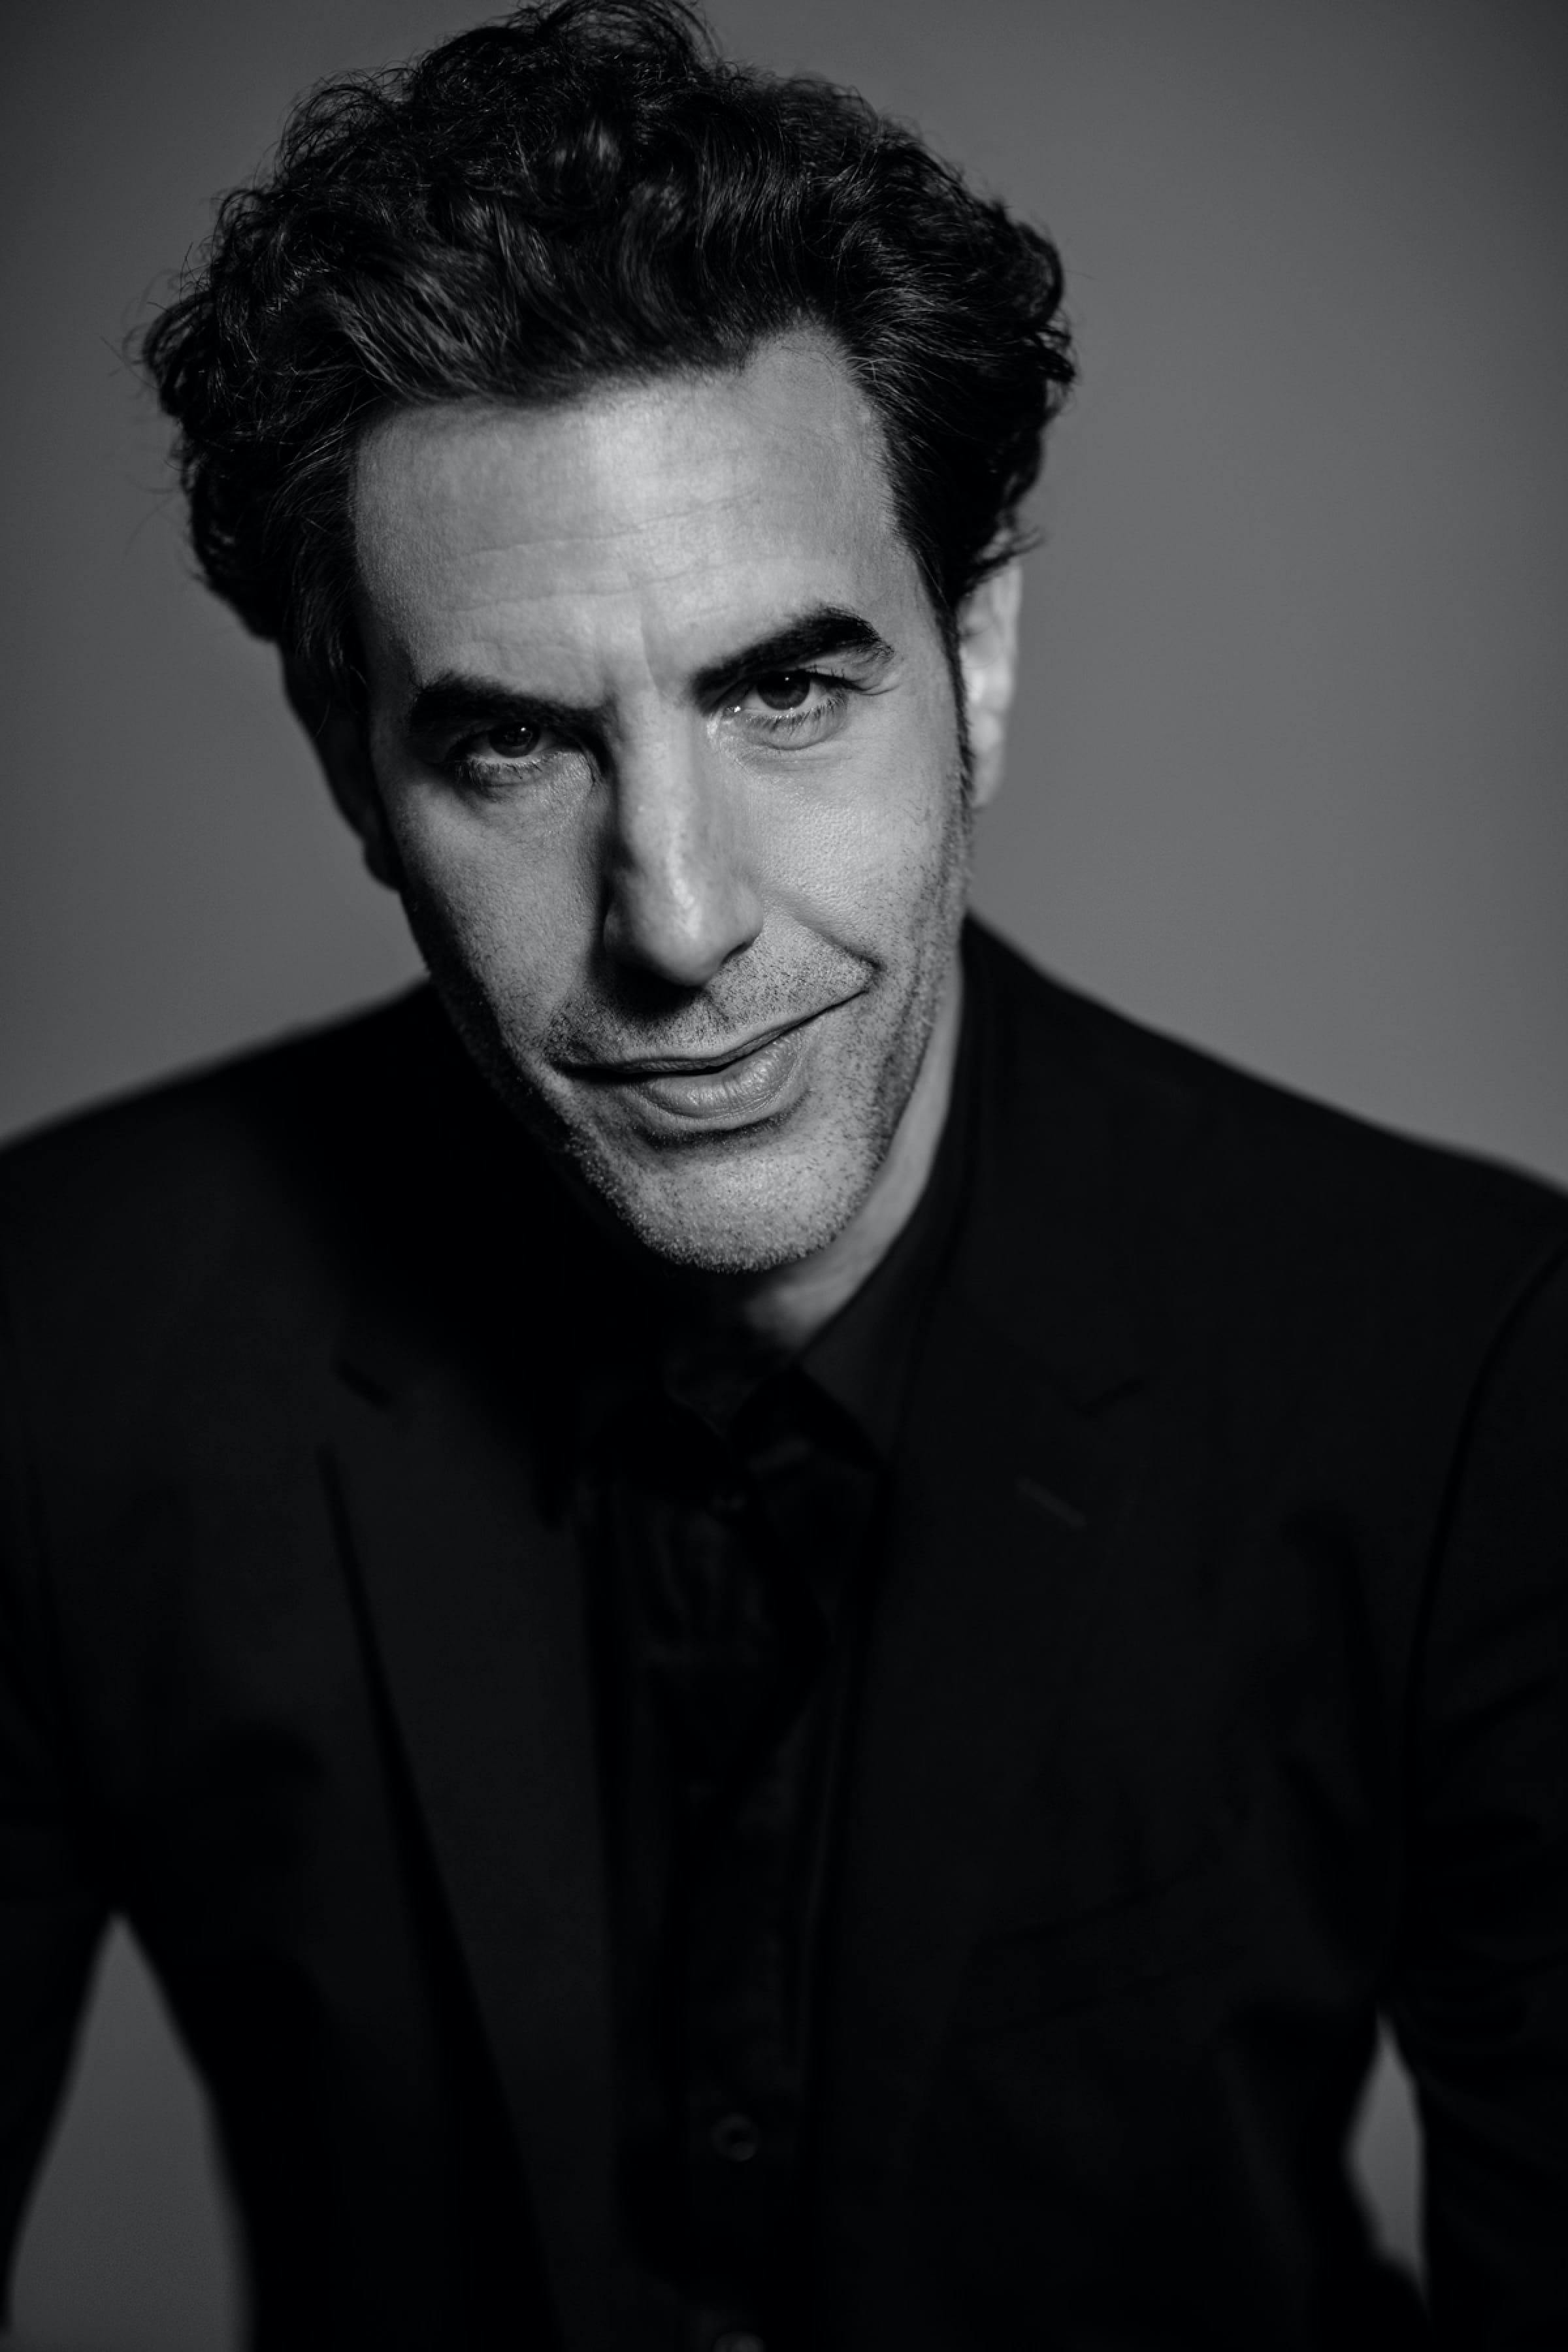 A black-and-white shot of Sacha Baron Cohen in a black suit smiling slightly looking at the camera.